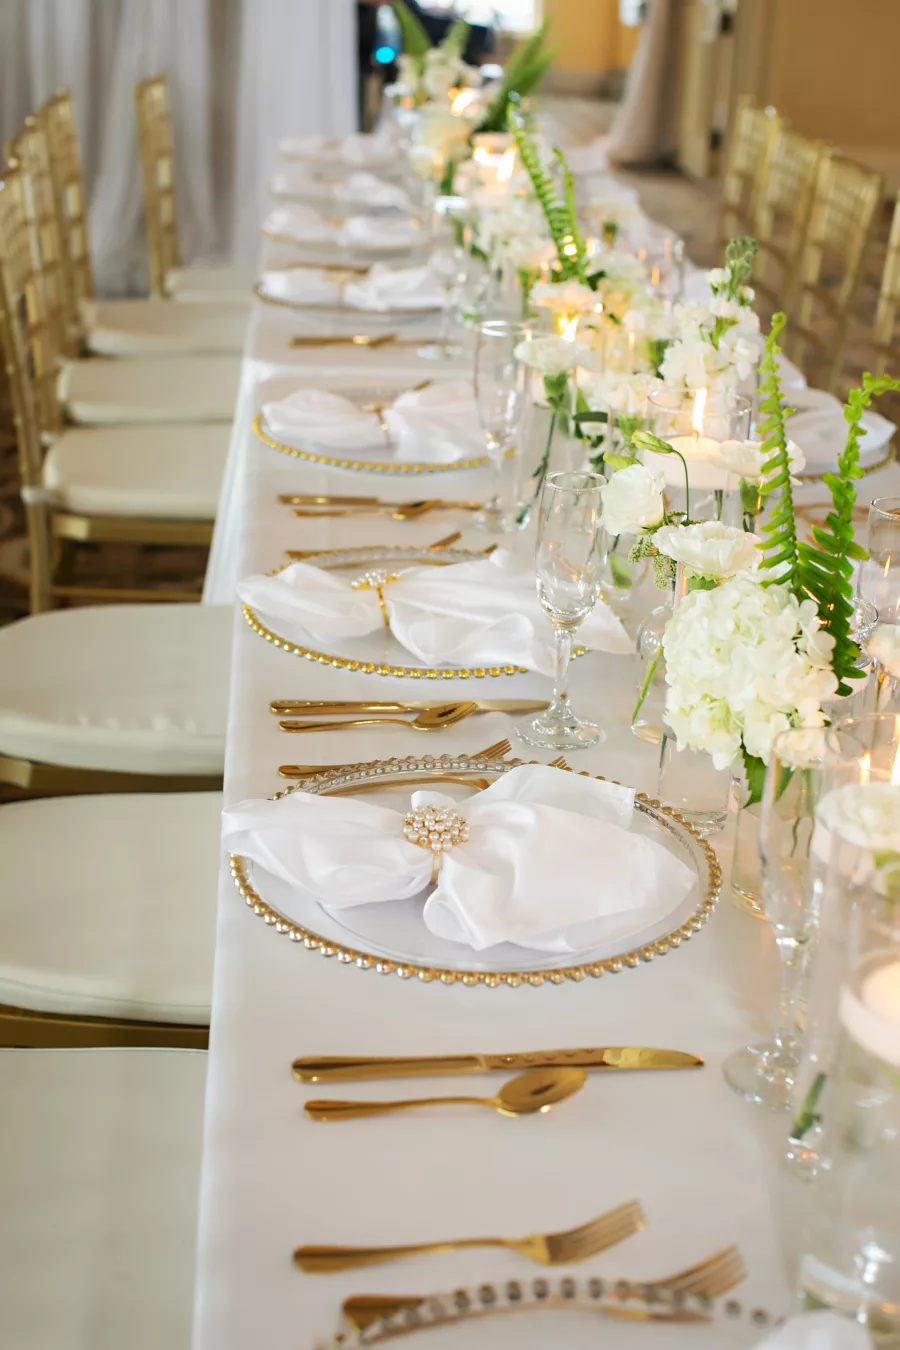 Classic Wedding Reception Gold Rimmed Beaded Chargers with Gold Flatware Place Setting Inspiration | Ybor Event Rentals Outside The Box Rentals